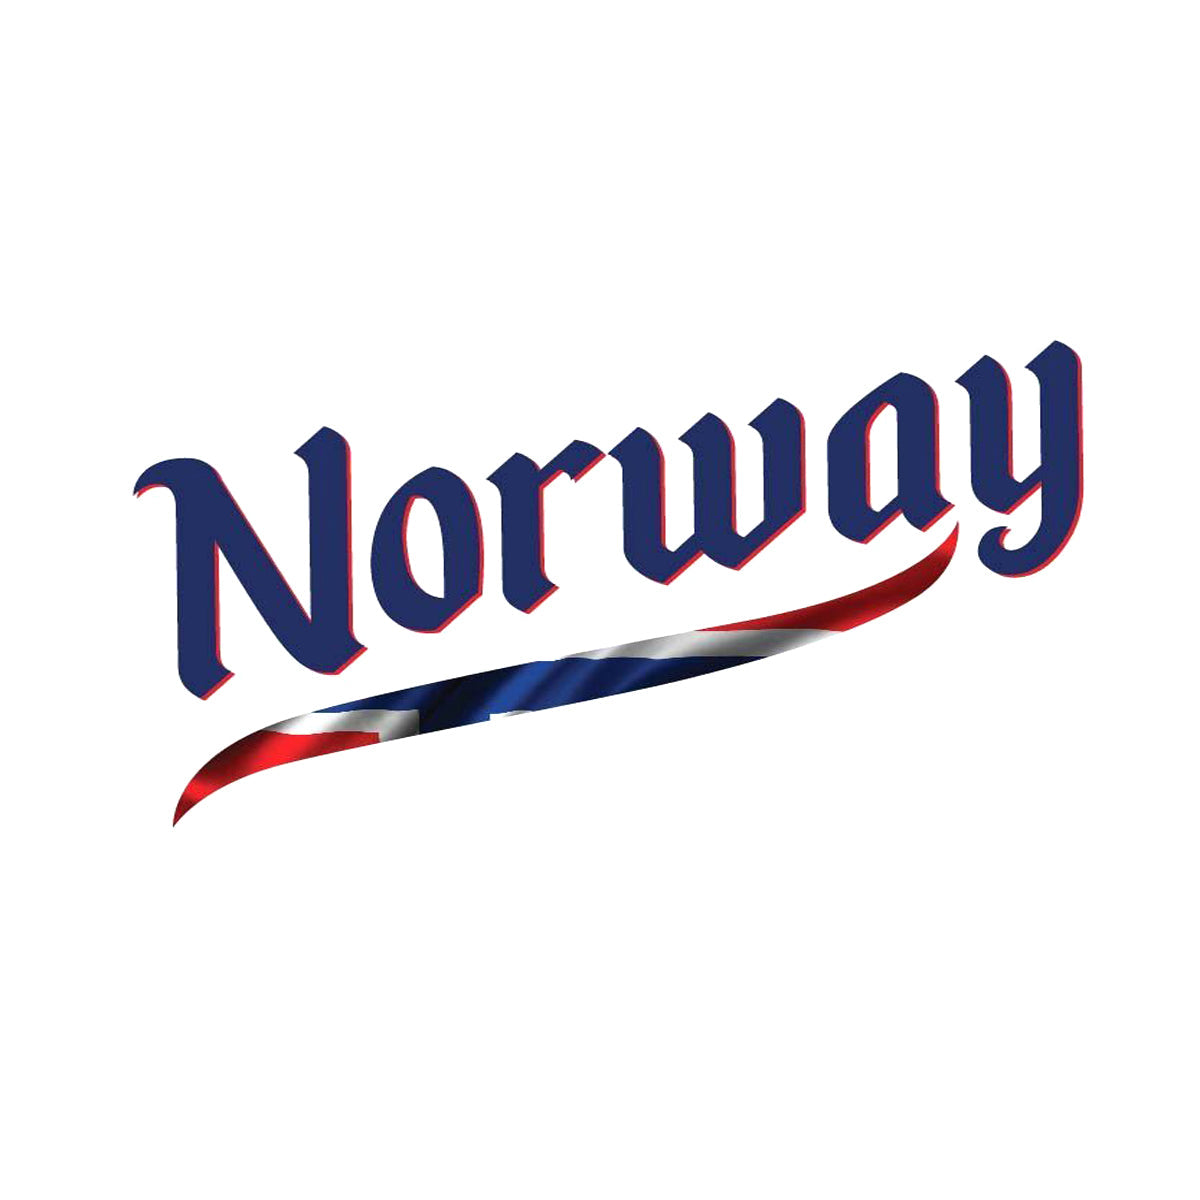 Norway Script World Cup 2019 Printed Tee T-shirts 411 